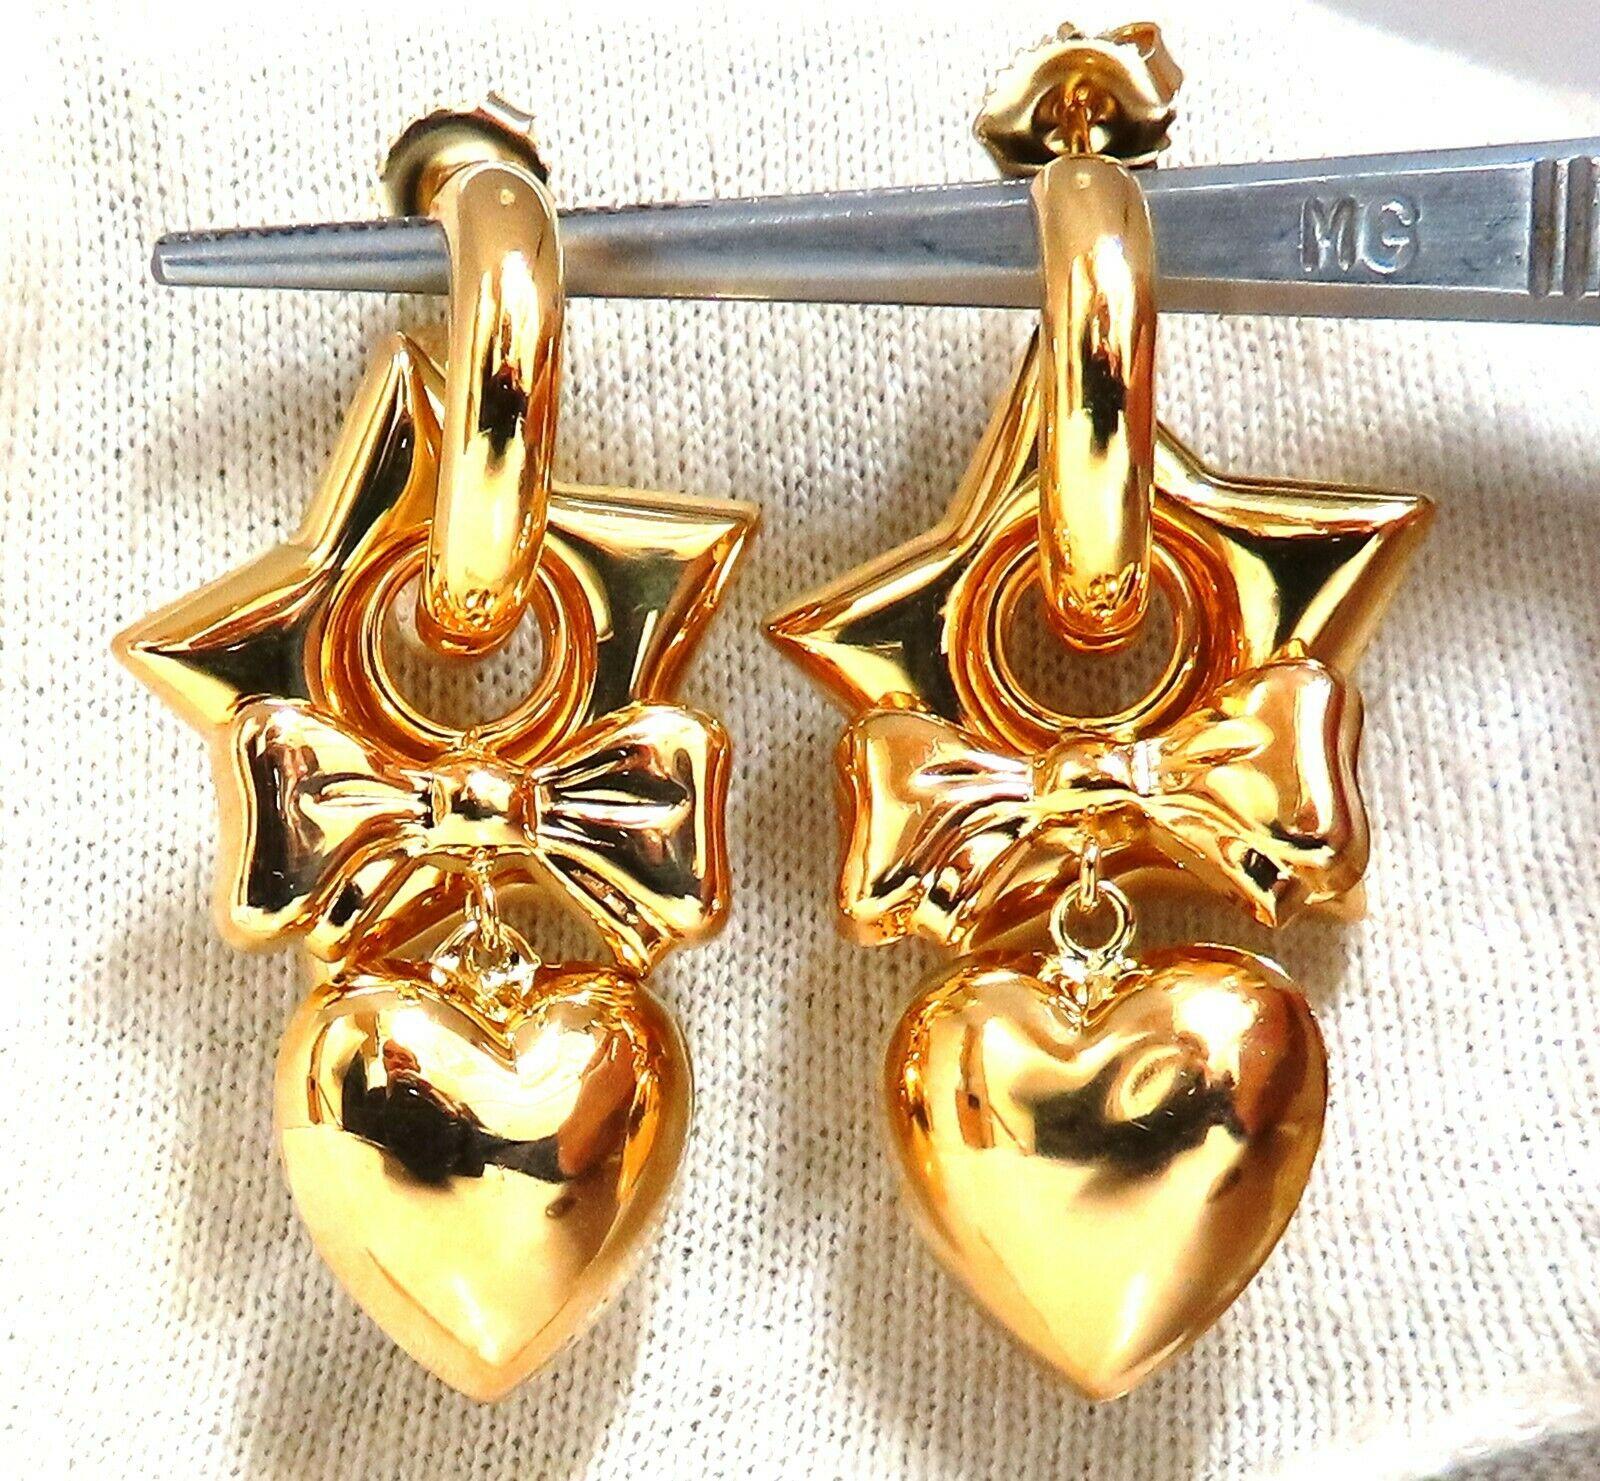 High shine Domed Heart, Star, Bow & Hoop Dangle earrings

Measurements of Earrings:

.89 inch wide 

1.8 inch long

9.9 grams / 14kt. yellow gold

Butterfly Push back Comfort

Earrings are gorgeous made